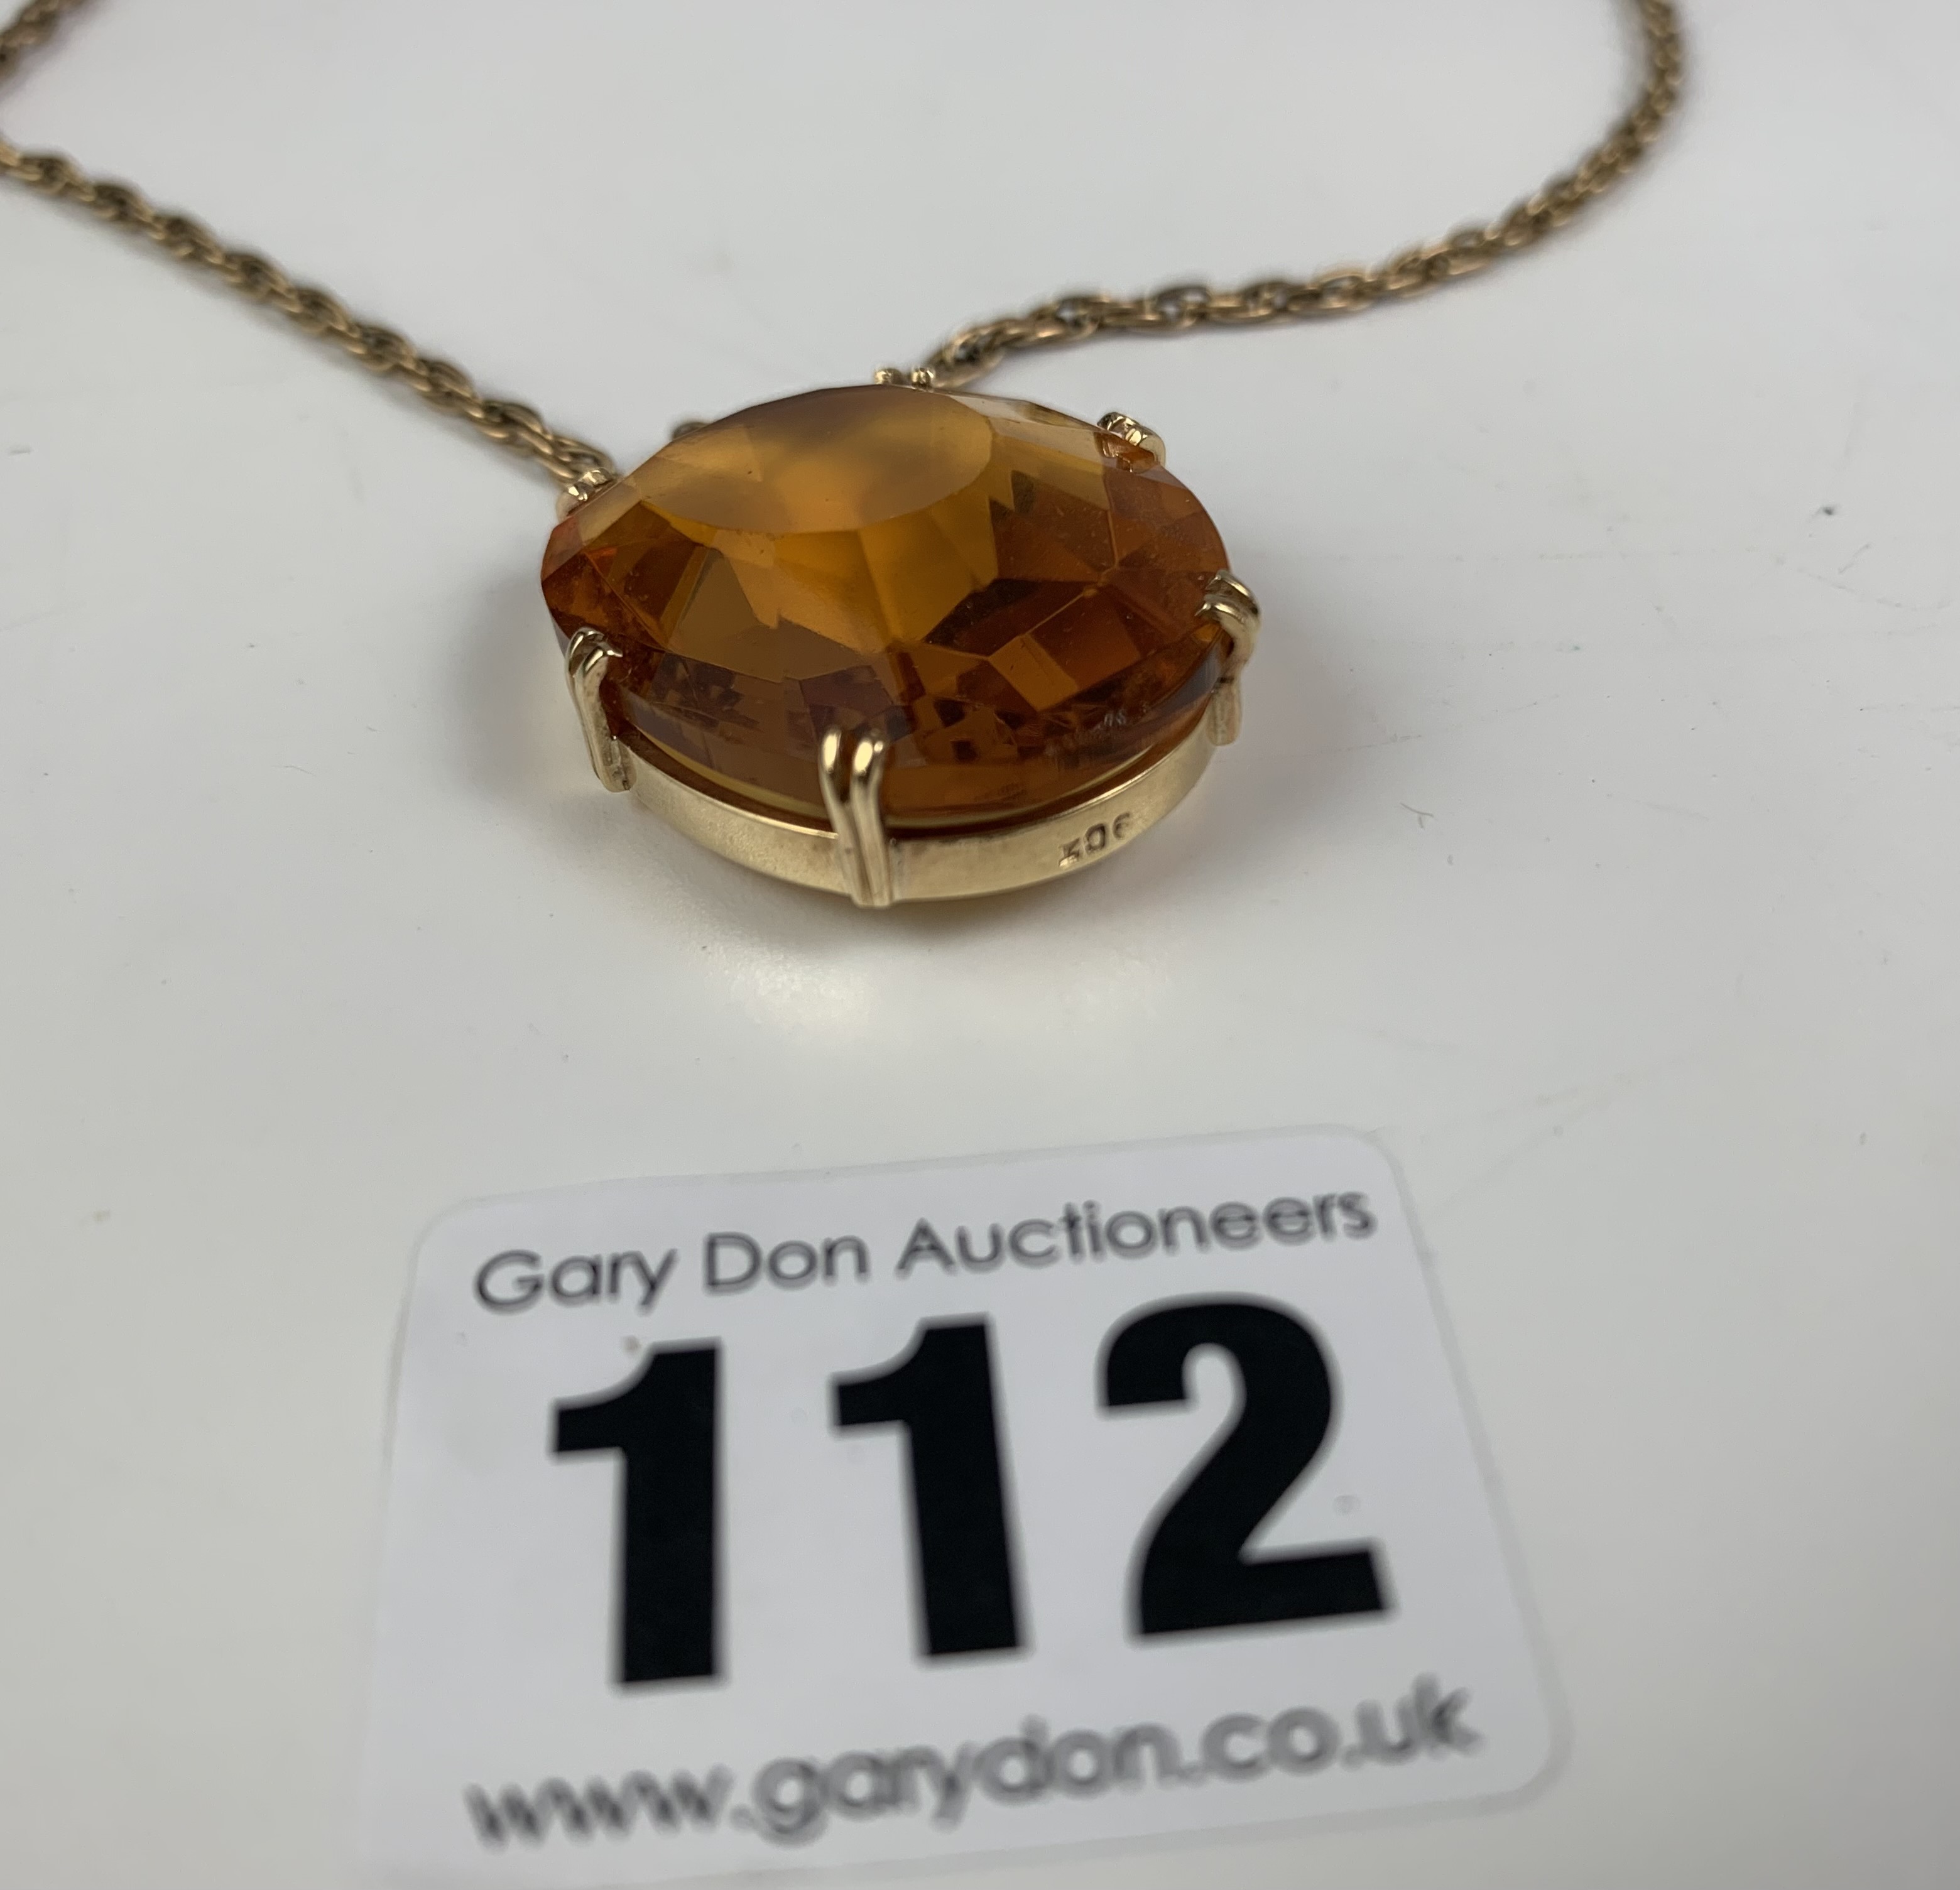 9k gold necklace, length 24” with gold framed orange topaz stone pendant 1.5” length. Total weight - Image 3 of 6